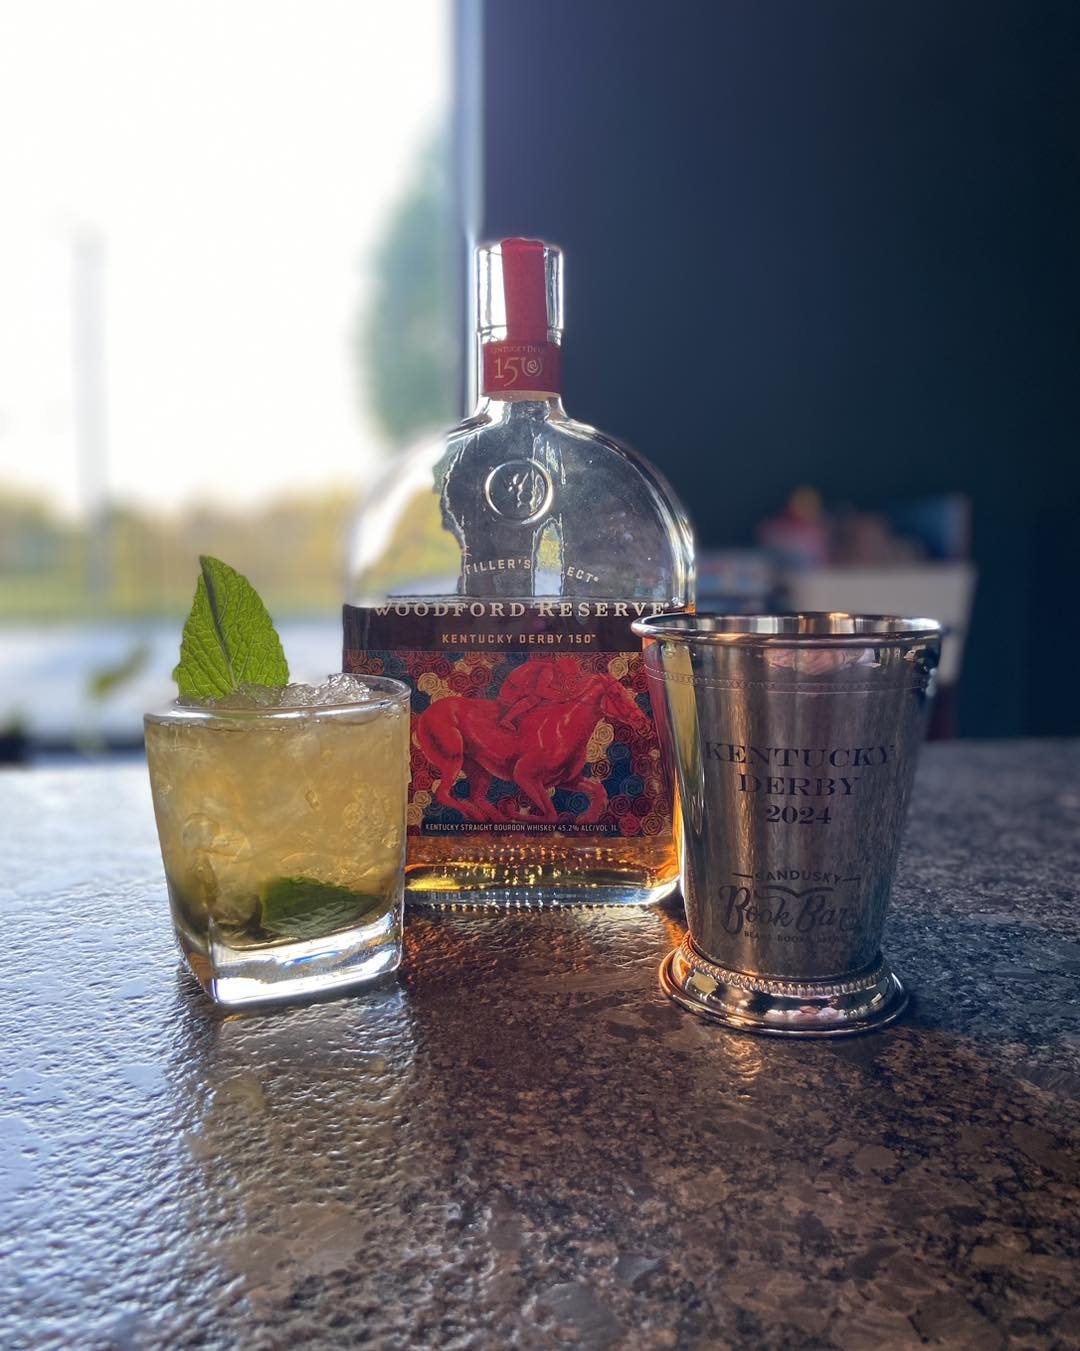 A massive thank you to everyone who came out for our Kentucky Derby Woodford Reserve whiskey tasting this week! 

We had fun with some trivia and competition, made some juleps, and one lucky team went home with this stunning julep cup made by the adm